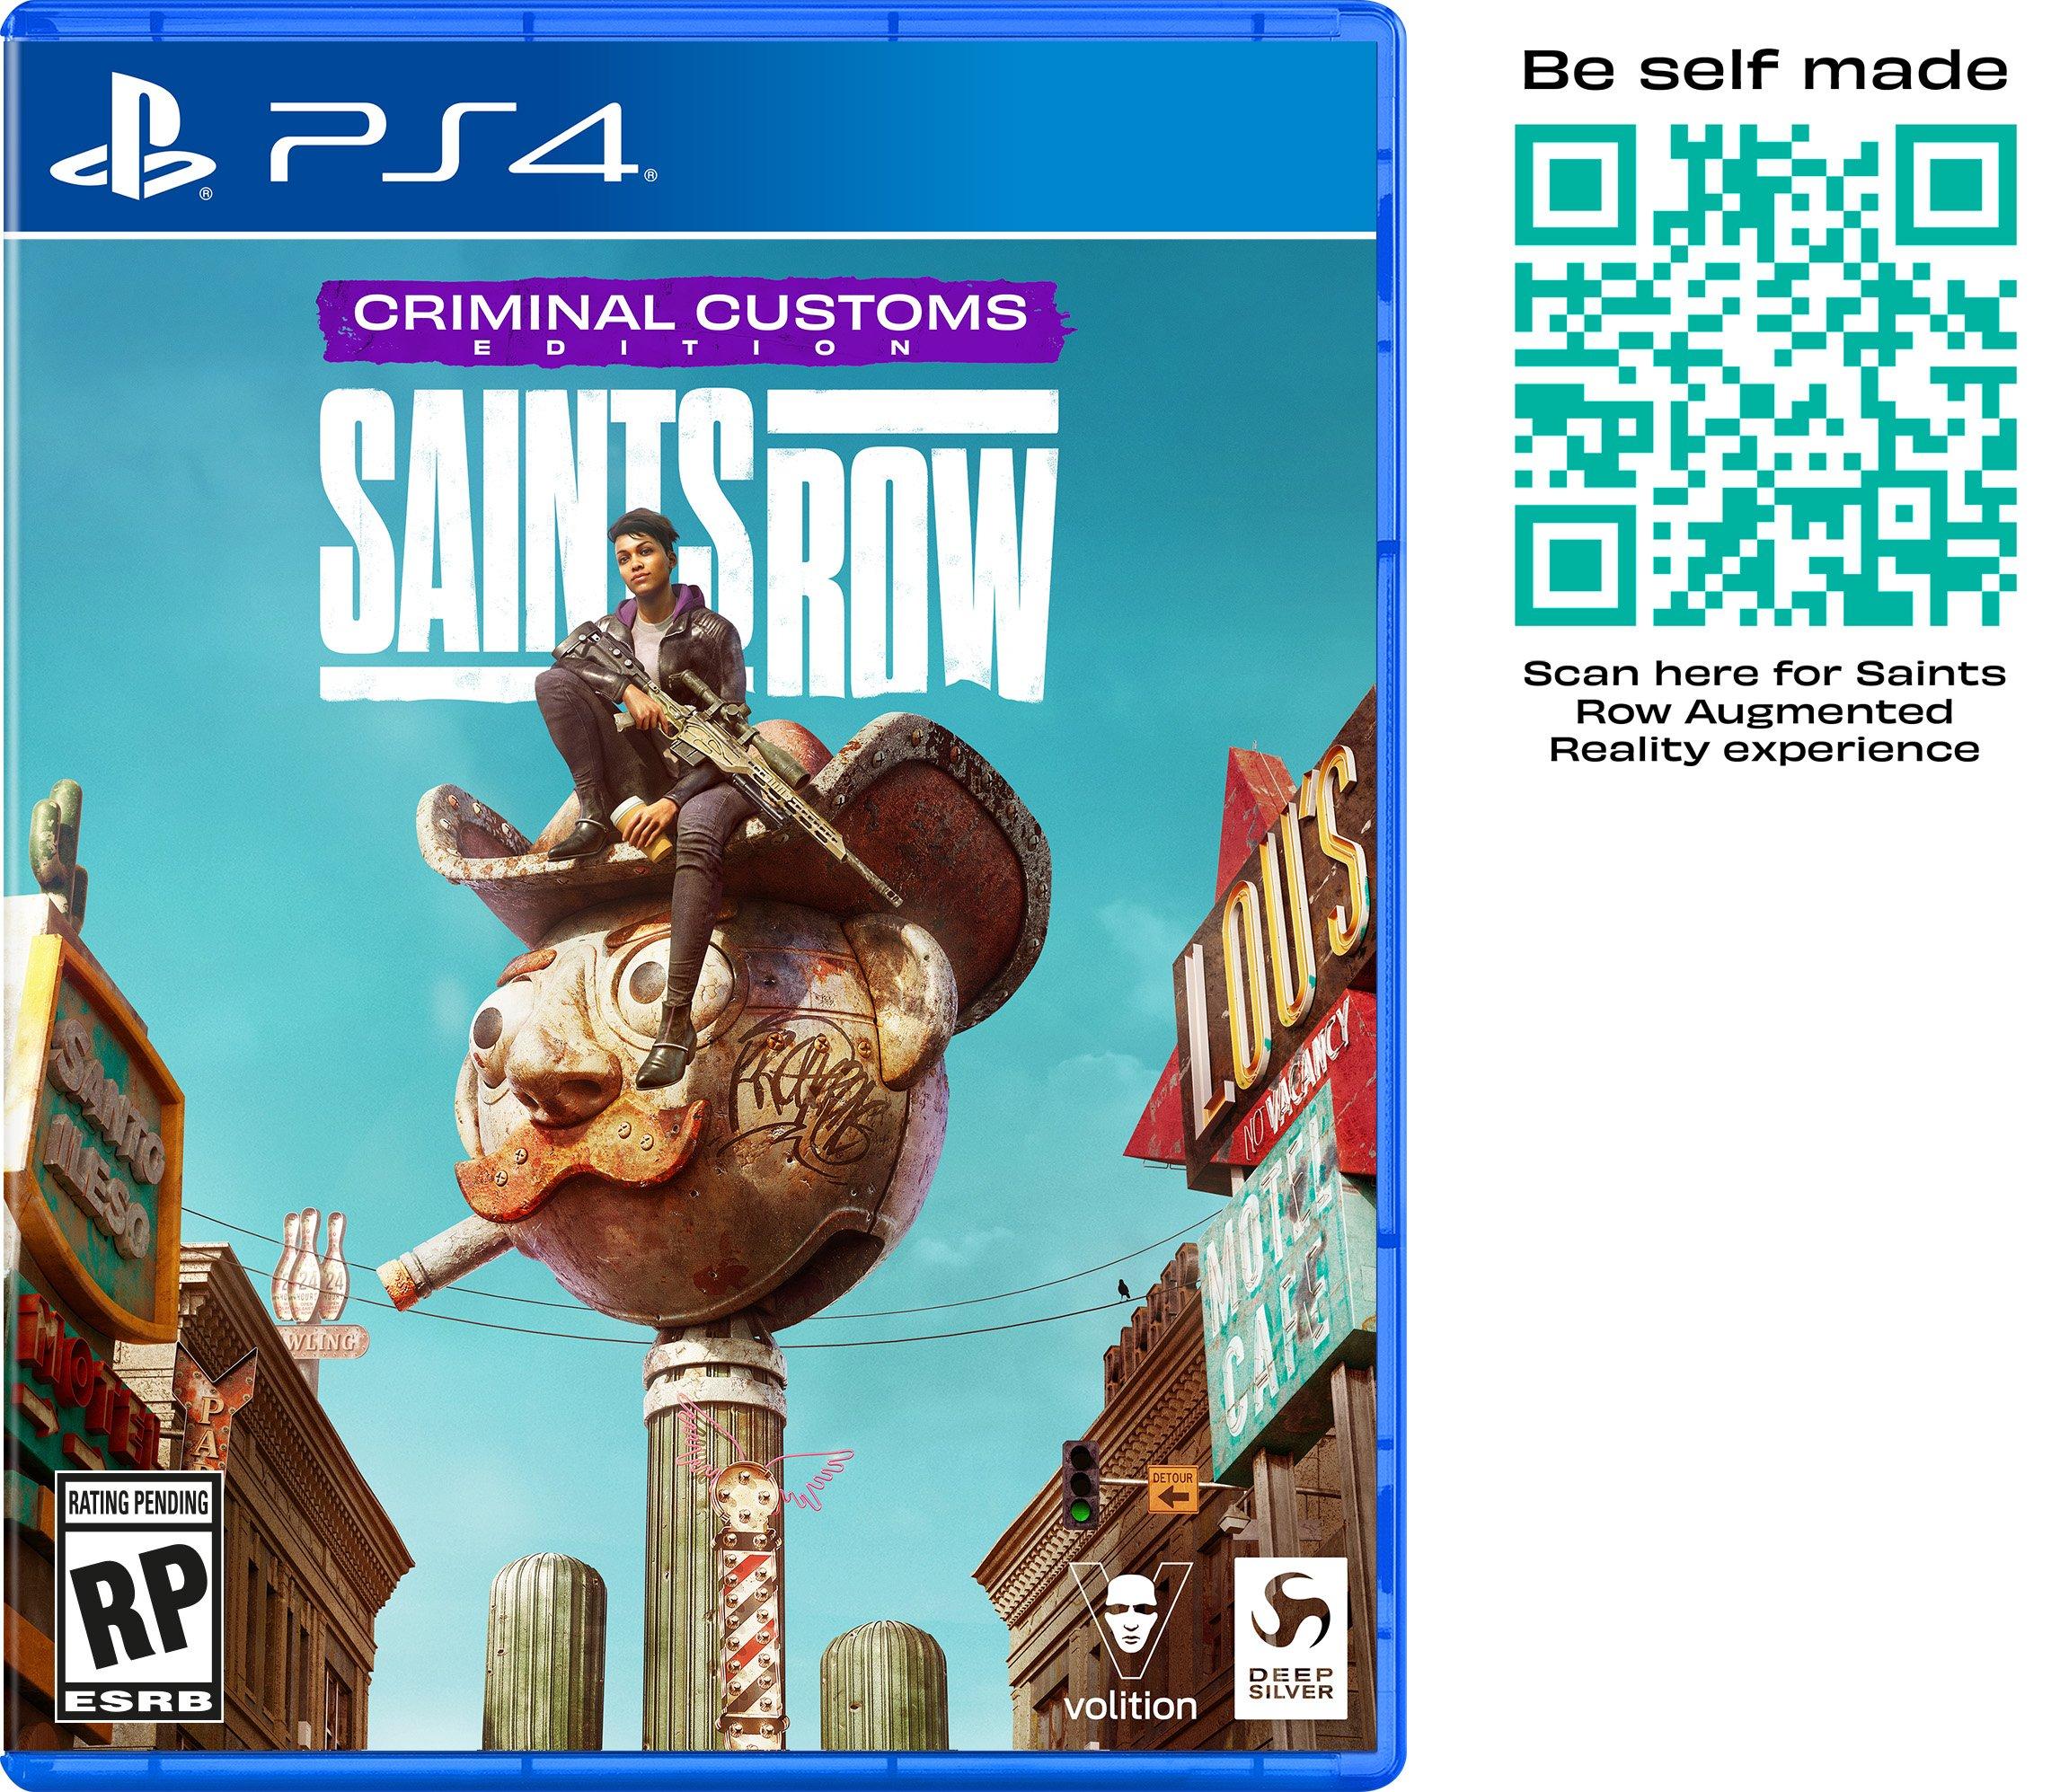 Saints Row The Third: The Full Package - PlayStation 3 | PlayStation 3 |  GameStop